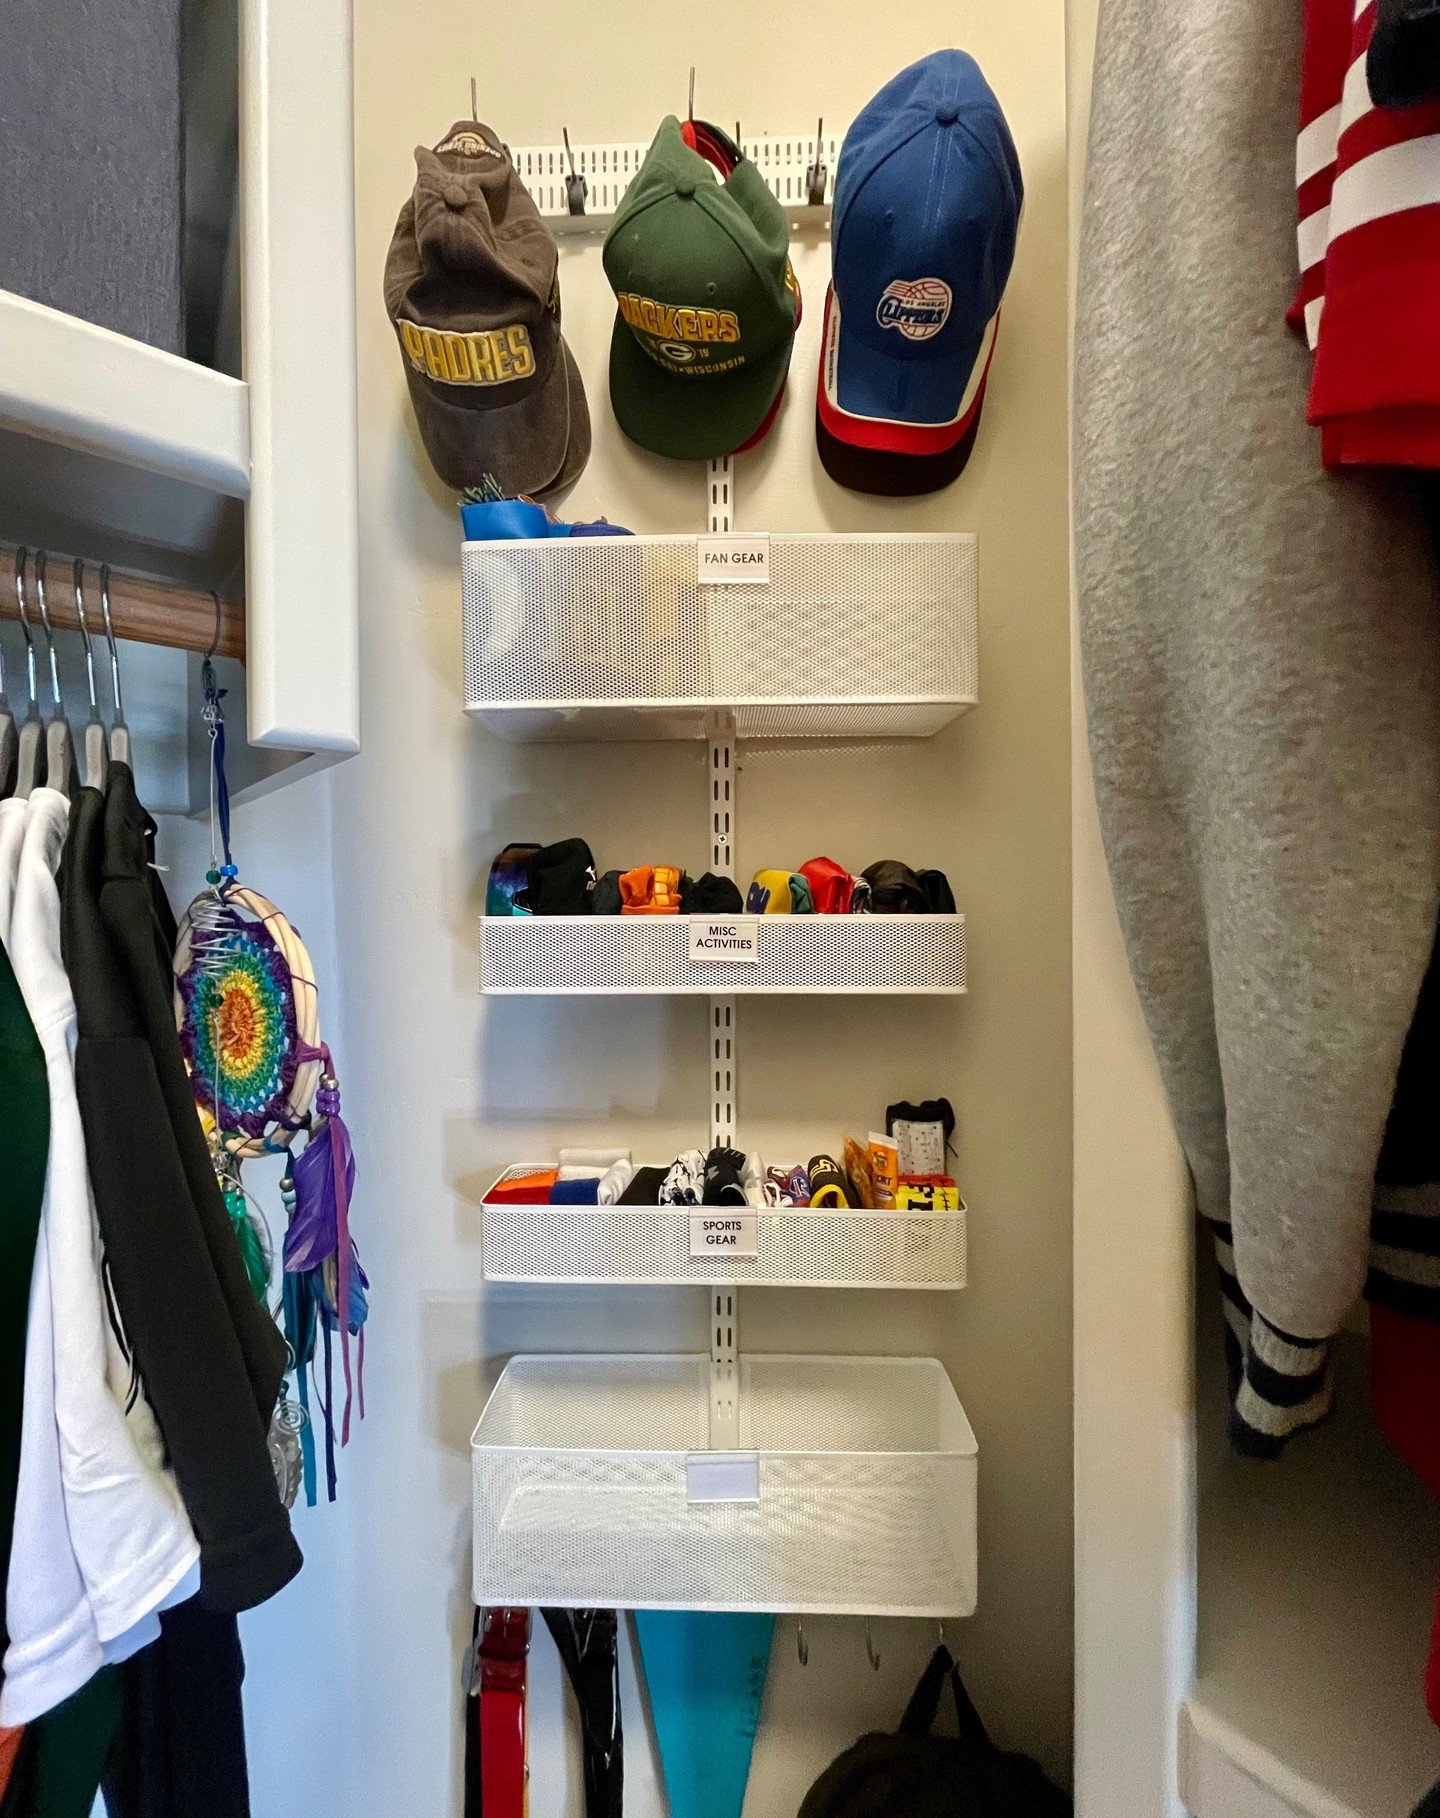 Elevate your organization game with the power of vertical space! Tight corners and awkward spots? No problem! The Elfa wall mounted system was the perfect solution to transform this cramped closet corner and utilize the vertical space to its fullest 